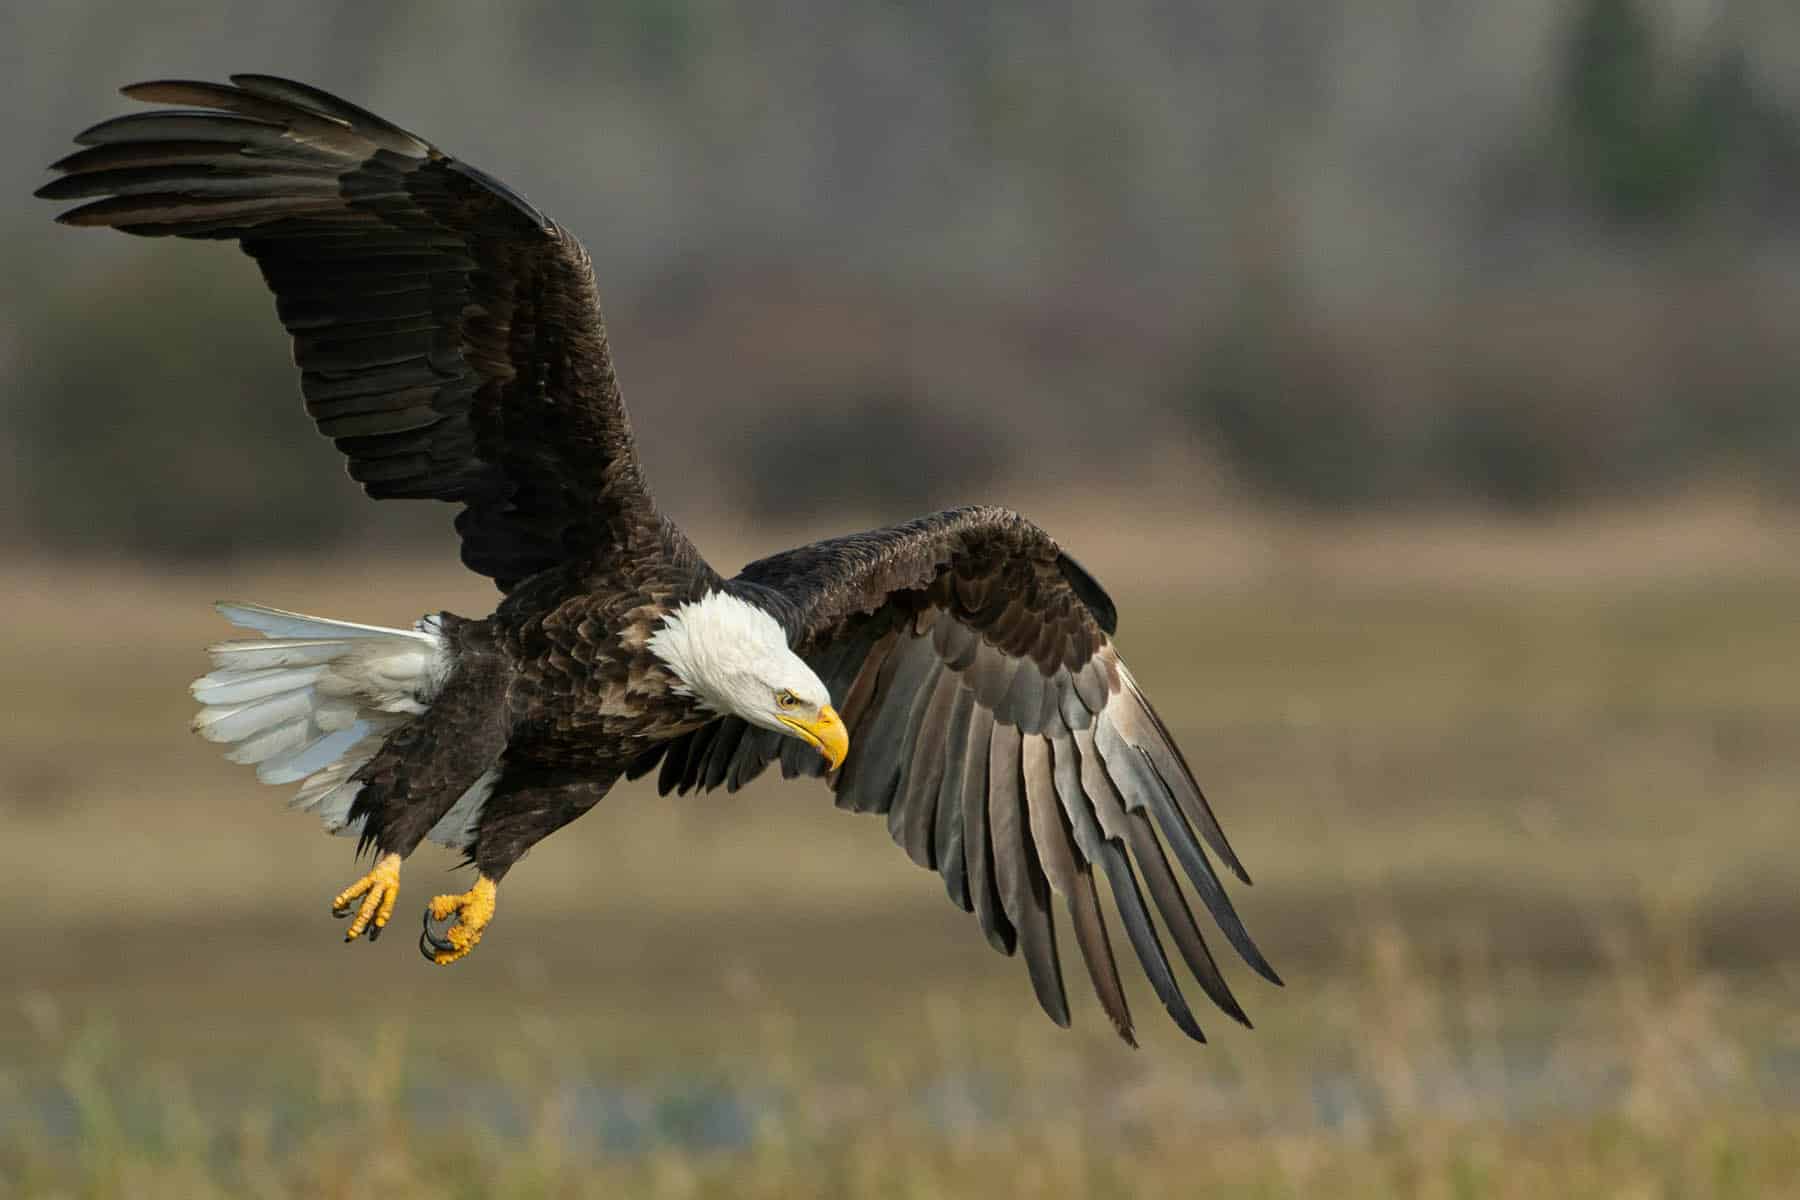 A bald eagle in mid-flight over a grassy field. The eagle’s wings are fully extended upwards and outwards, showcasing the impressive wingspan and the detailed feather pattern. The bird’s head is white with a sharp yellow beak, contrasting with its dark brown body and wings. The eagle is focused intently on something below, suggesting it might be hunting. The background is softly blurred, highlighting the eagle’s sharp features against the muted colors of the natural setting.